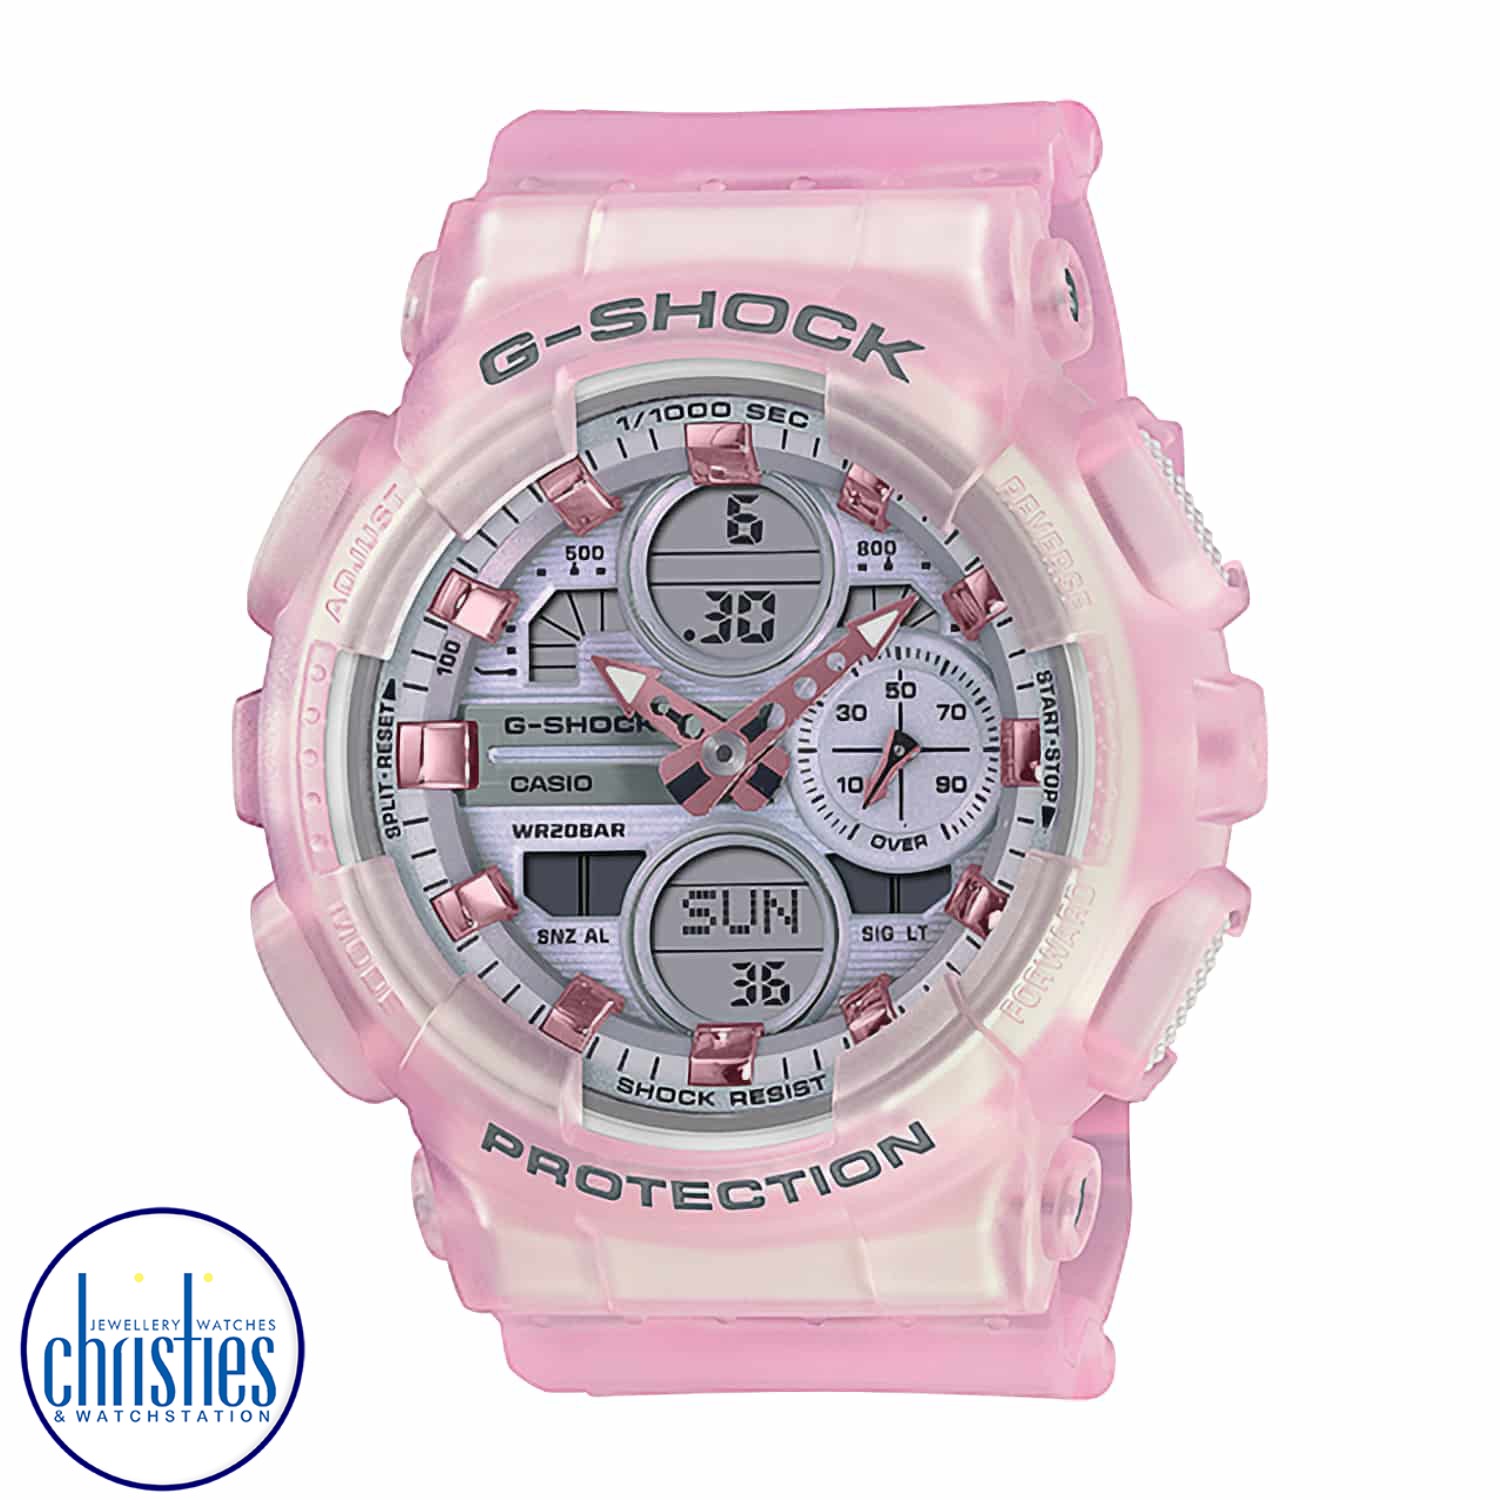 GMAS140NP-4A G-SHOCK Womens Neo Punk Watch. Casio brings punk fashion to the ever-popular analog-digital G-SHOCK line, in four compact designs.  Punk glam meets pastel with loads of flashy metallic colour and studs offset by softer hues for the case, band